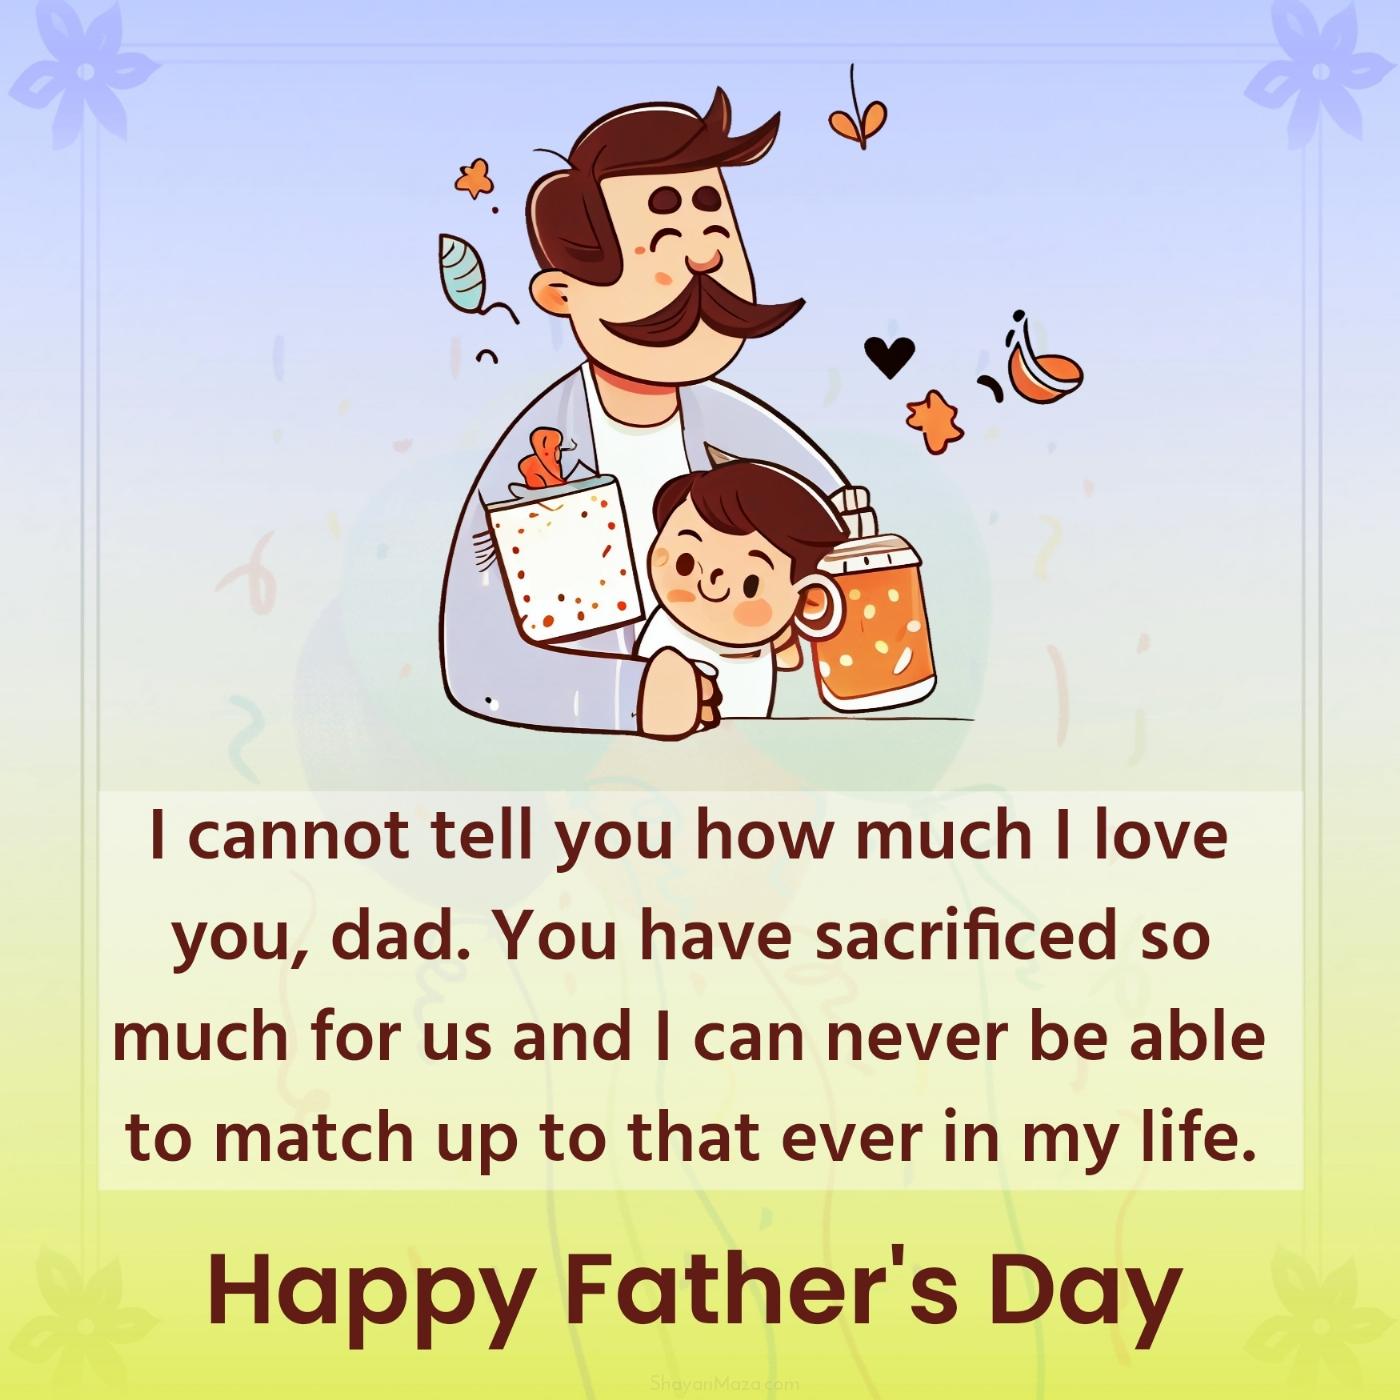 I cannot tell you how much I love you dad